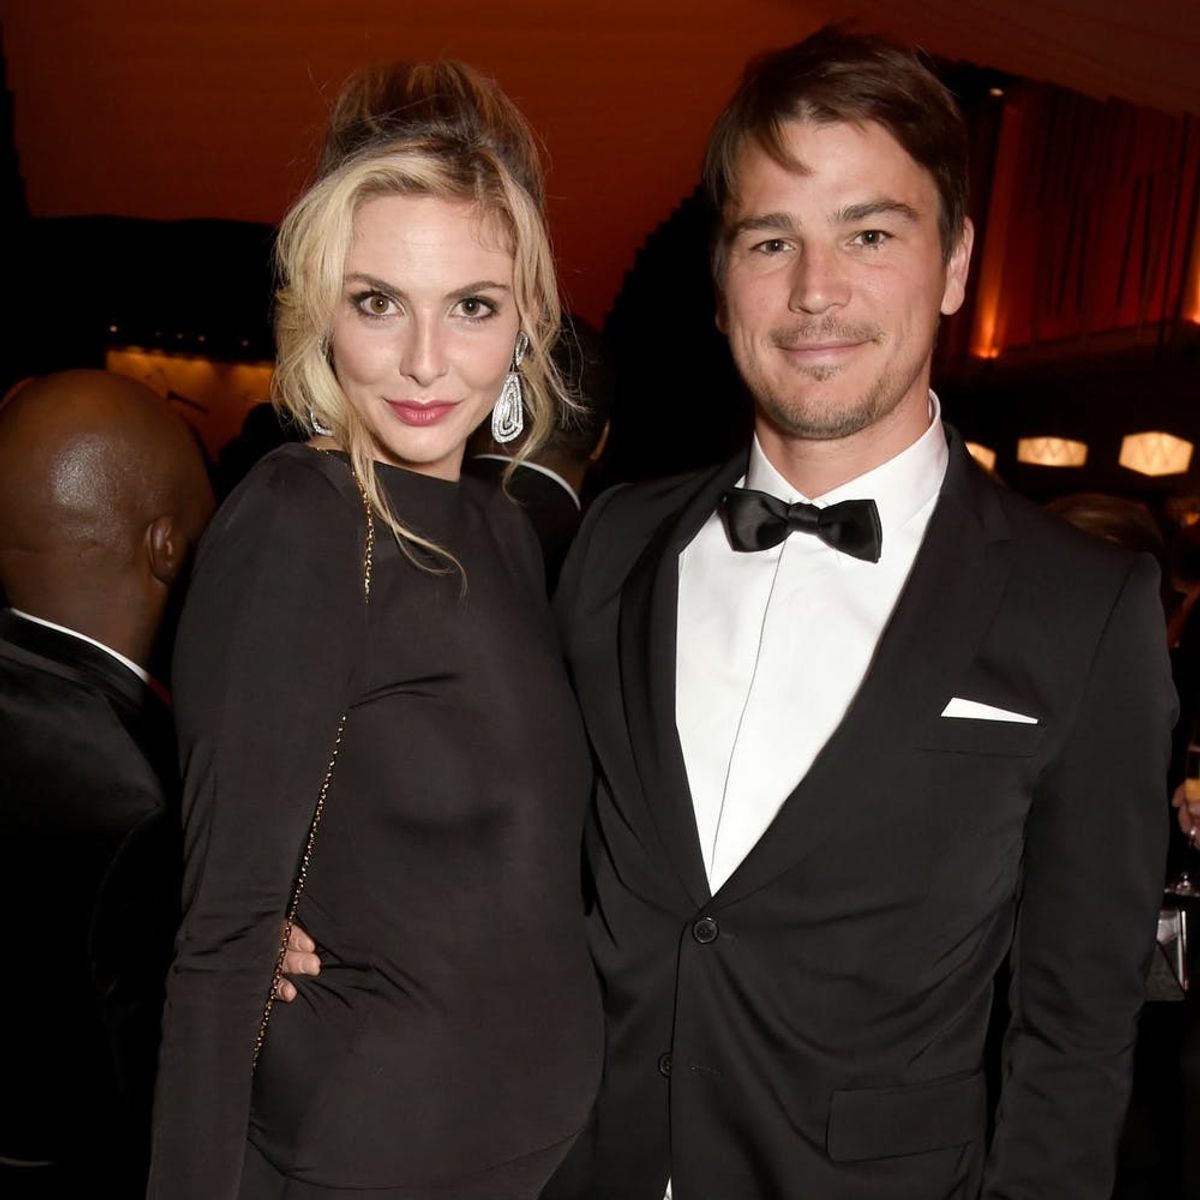 Josh Hartnett and Tamsin Egerton Surprised Us All With a Red Carpet Baby Bump Debut